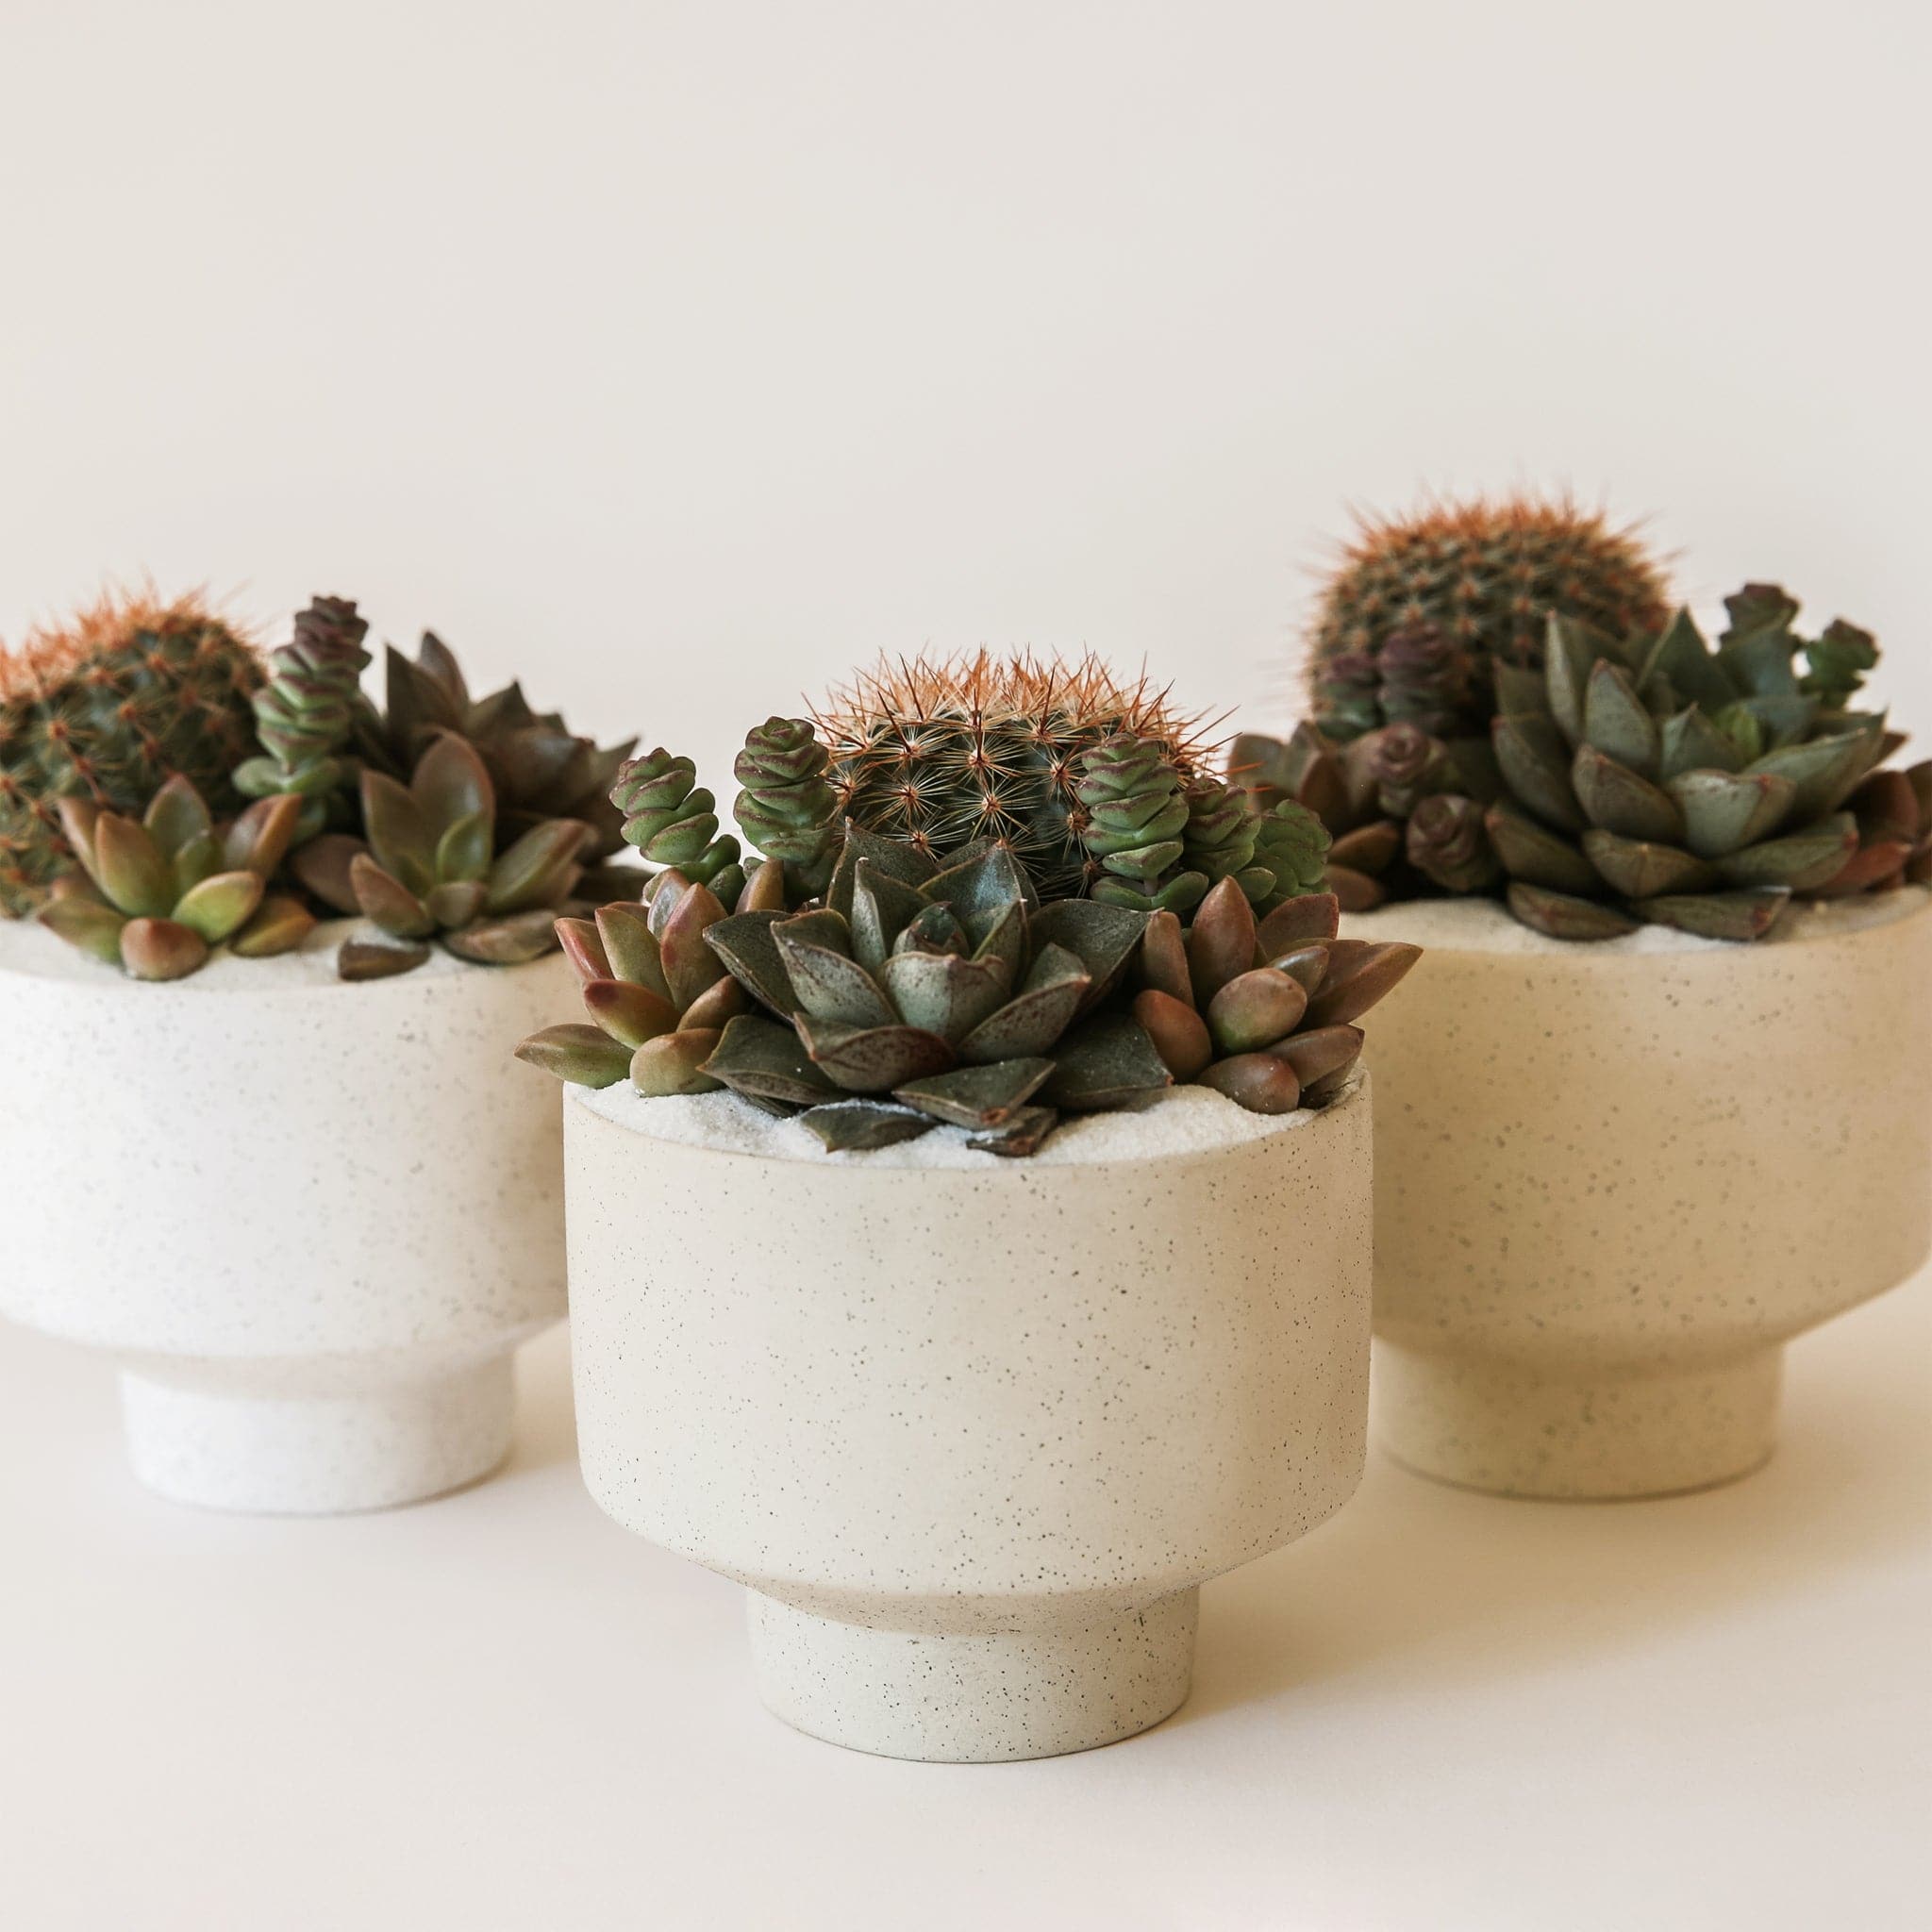 An arrangement of speckled planters with an elevated base and warm succulent display.